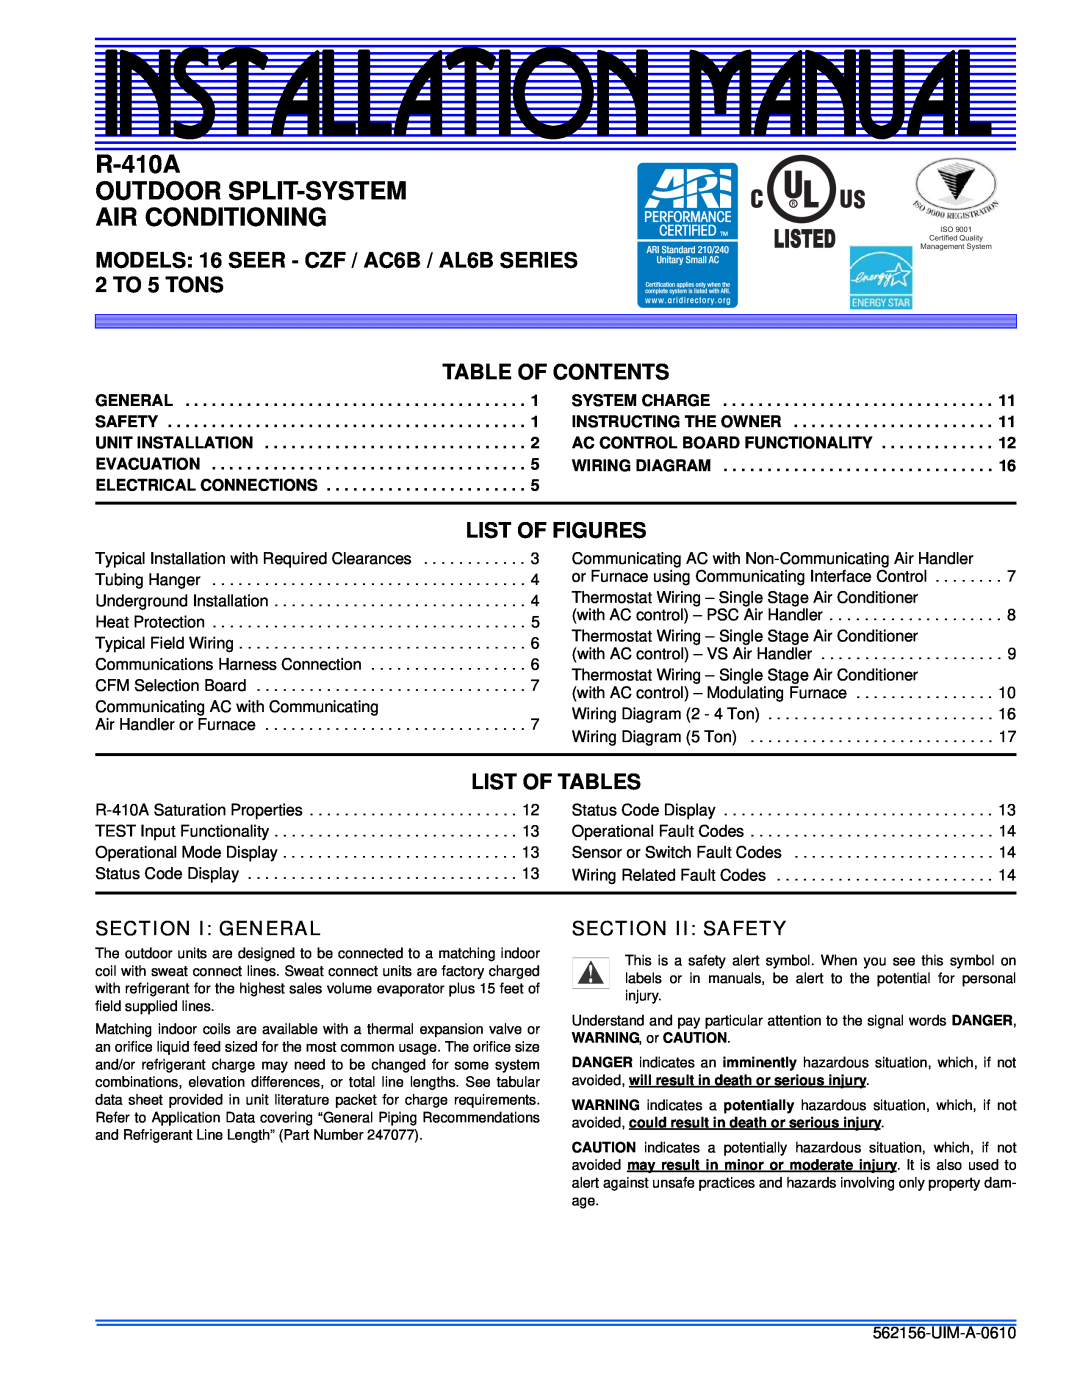 Johnson Controls AC6B installation manual R-410A OUTDOOR SPLIT-SYSTEM AIR CONDITIONING, Section I General, Listed 